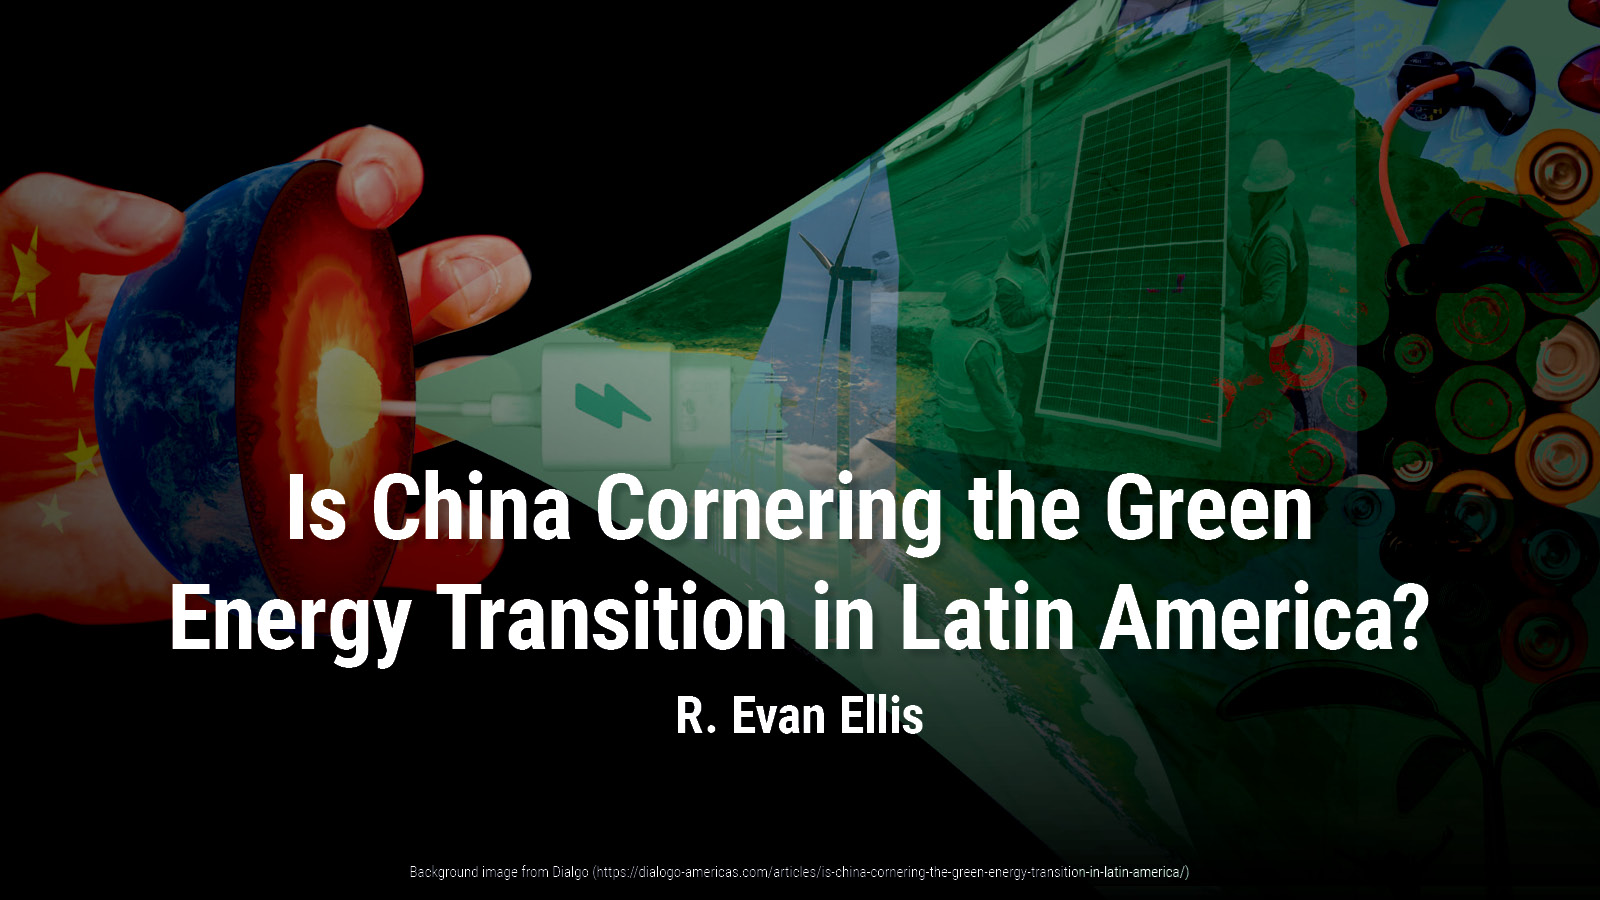 Is China Cornering the Green Energy Transition in Latin America? | R. Evan Ellis